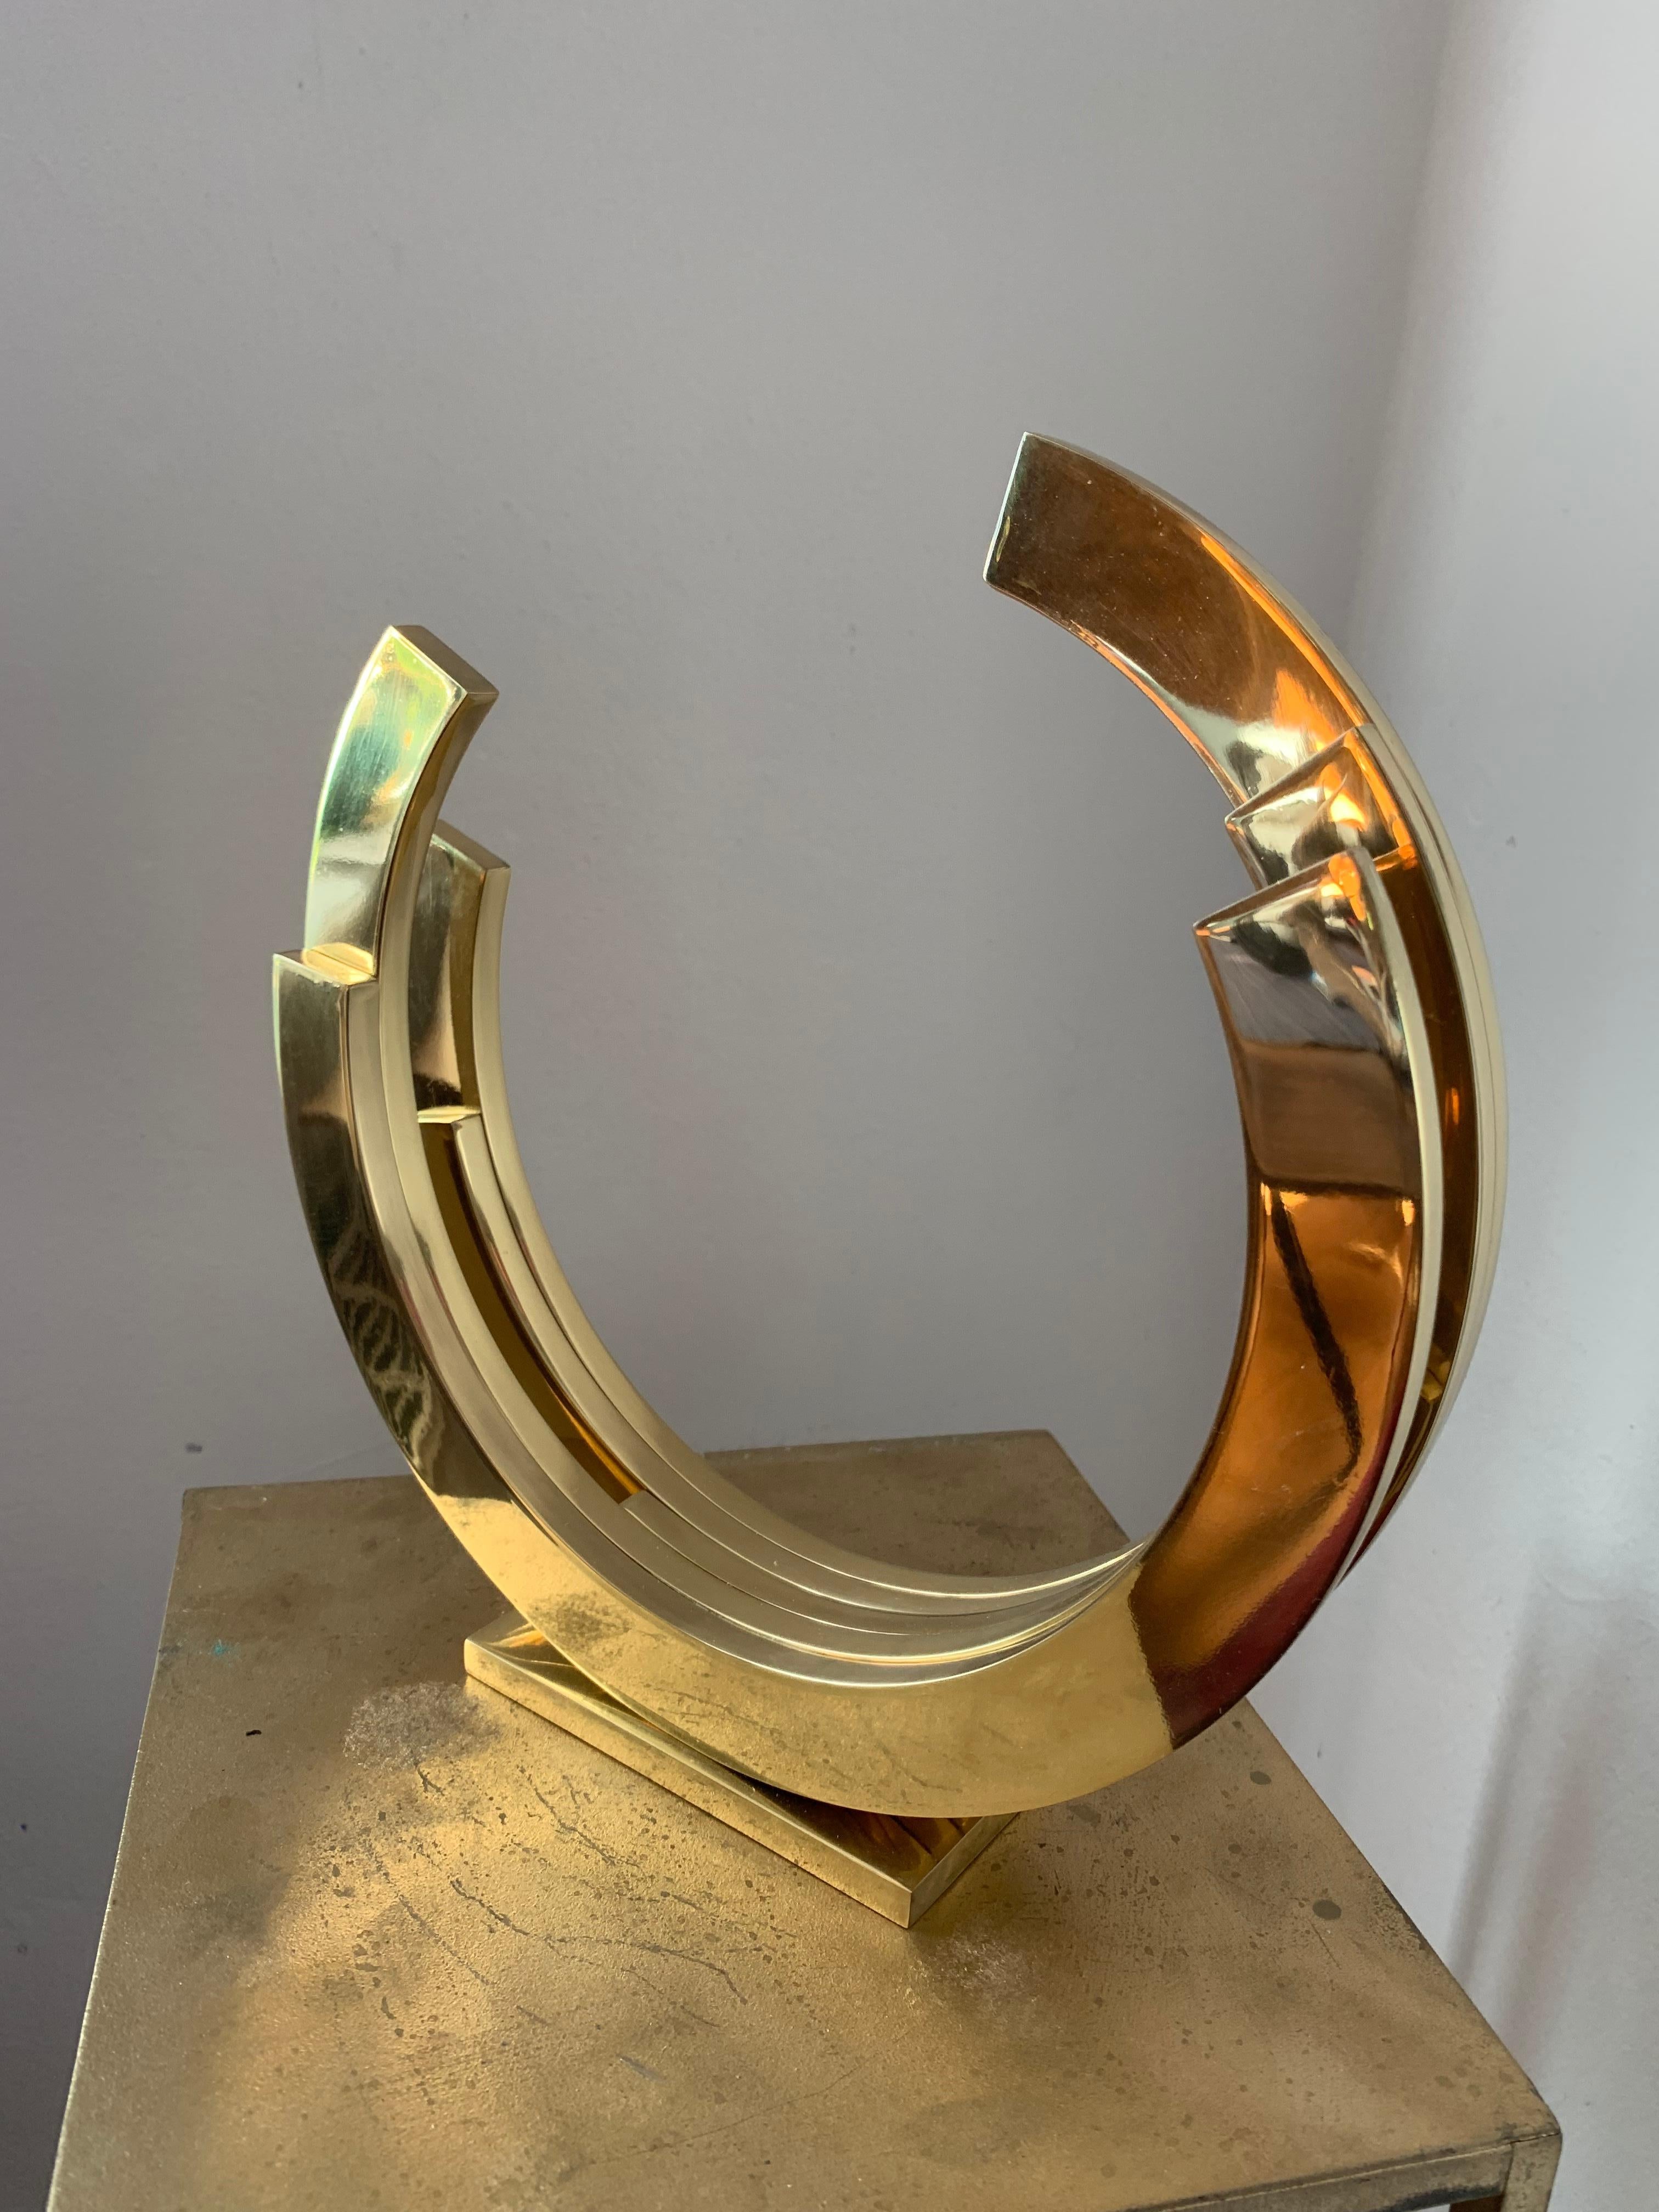 Contemporary Minimal Gold Brass sculpture, gilded and then lacquered to keep its shiny surface.
Limited edition of 10
Kuno Vollet is a sculptor working with different materials such as clay, bronze and brass. 
Other works are not cast but heated and